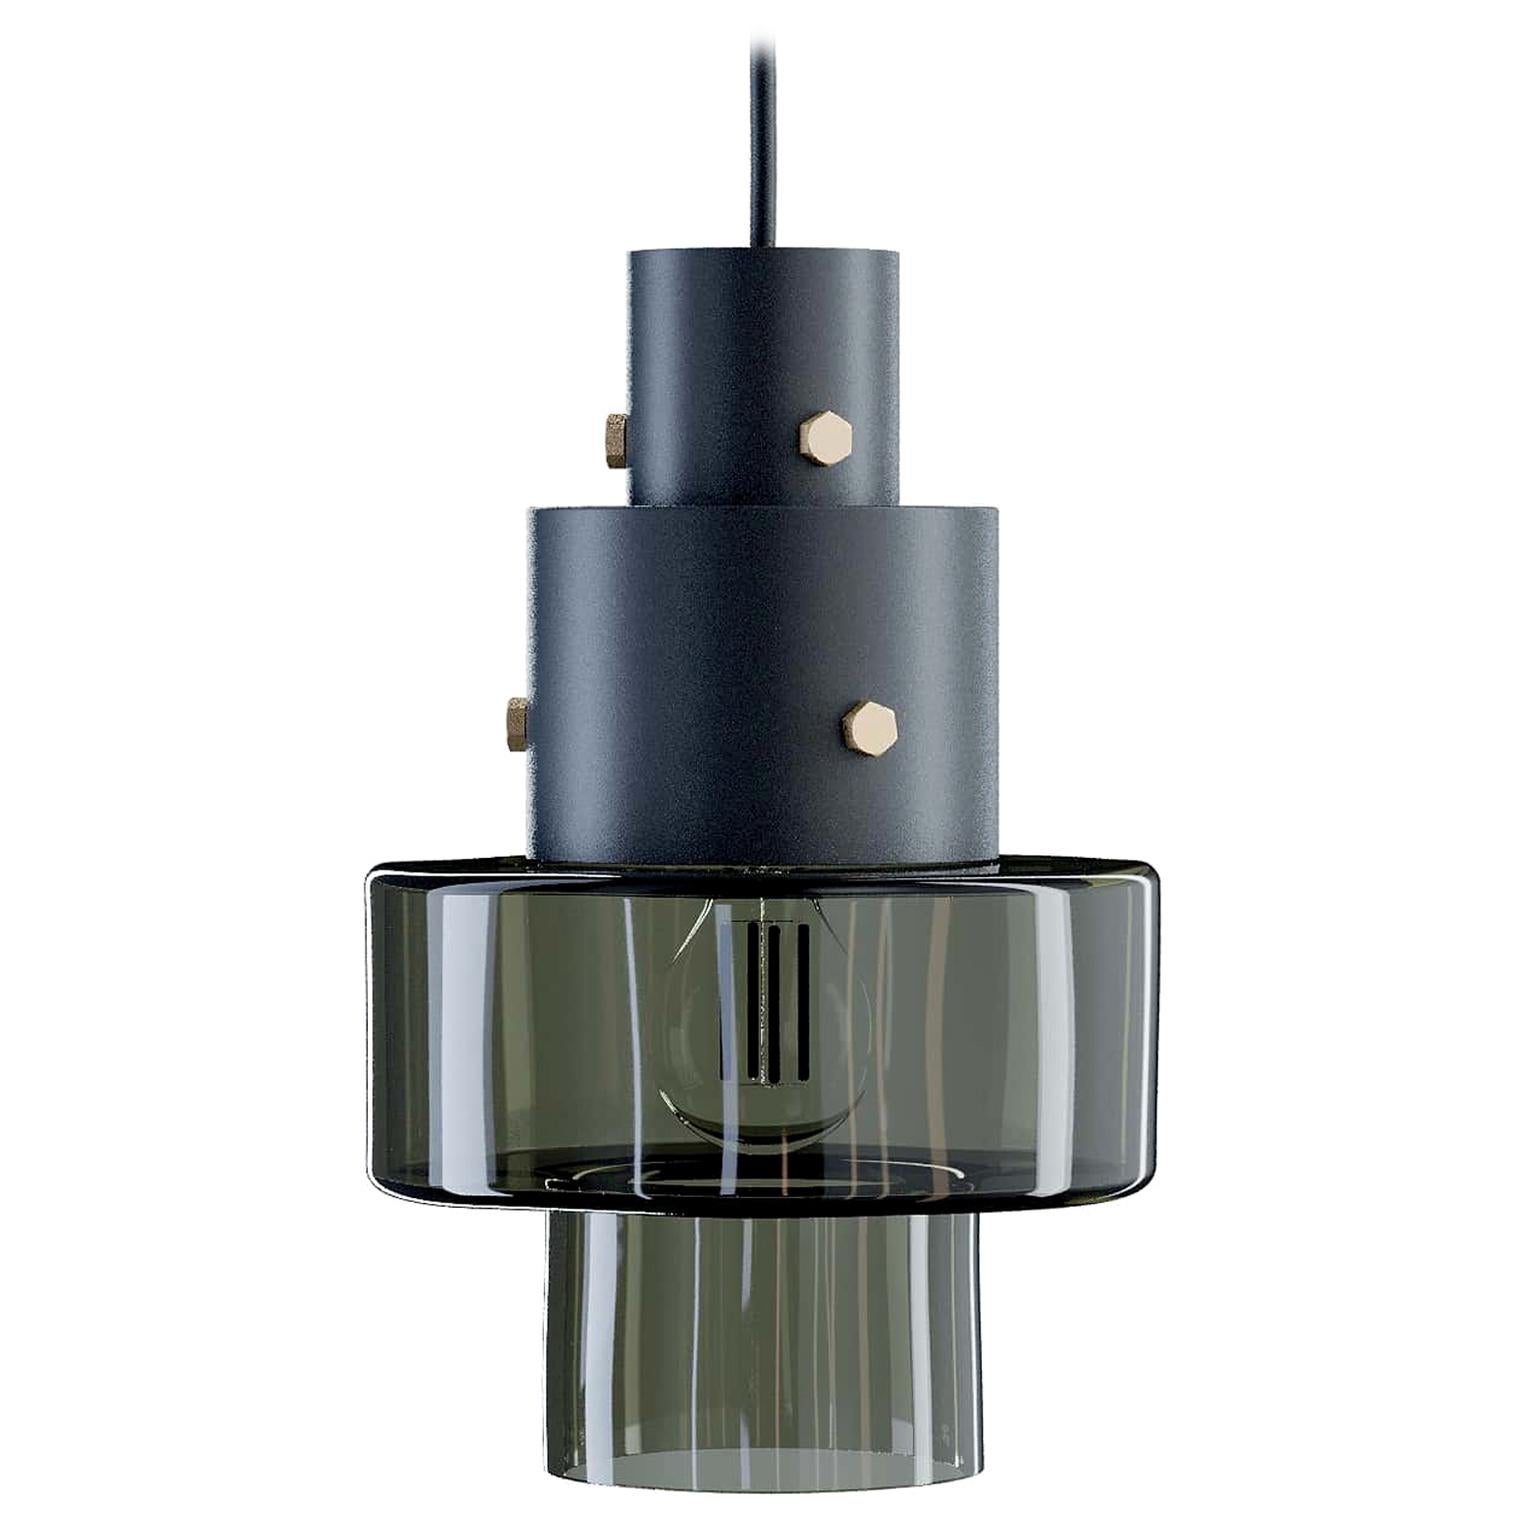 Gask Suspension Lamp in Black with Army Green Diffuser by Diesel Living